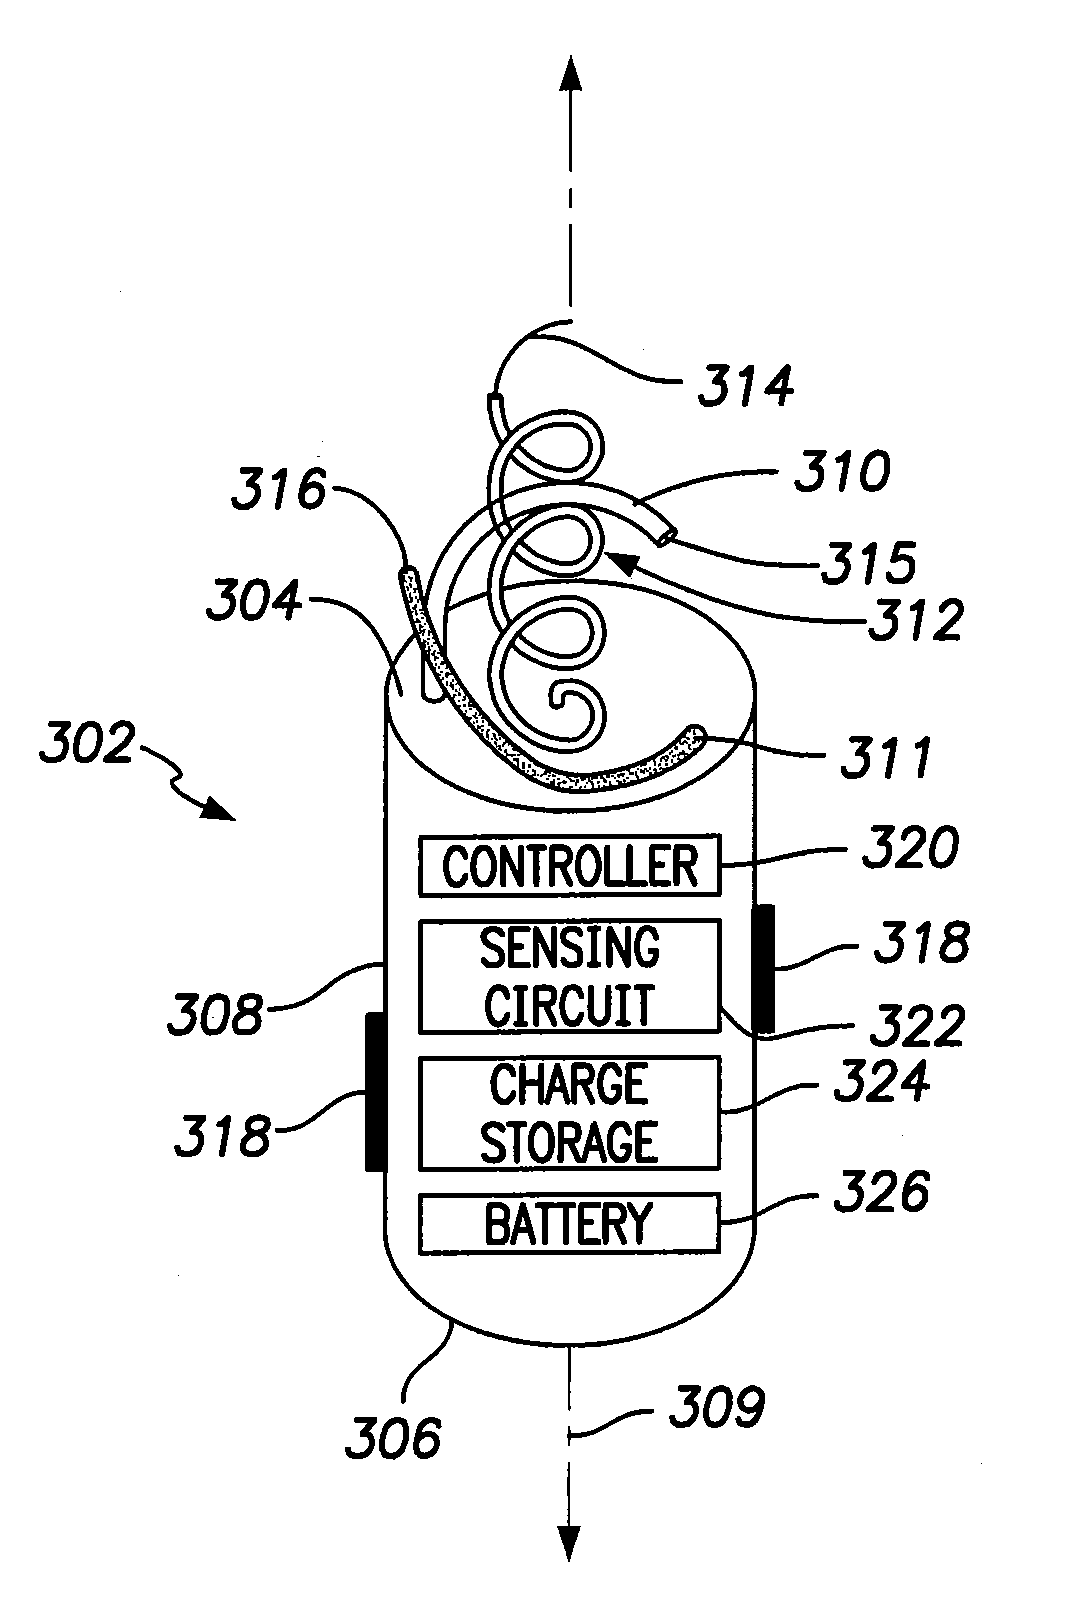 Single-chamber leadless intra-cardiac medical device with dual-chamber functionality